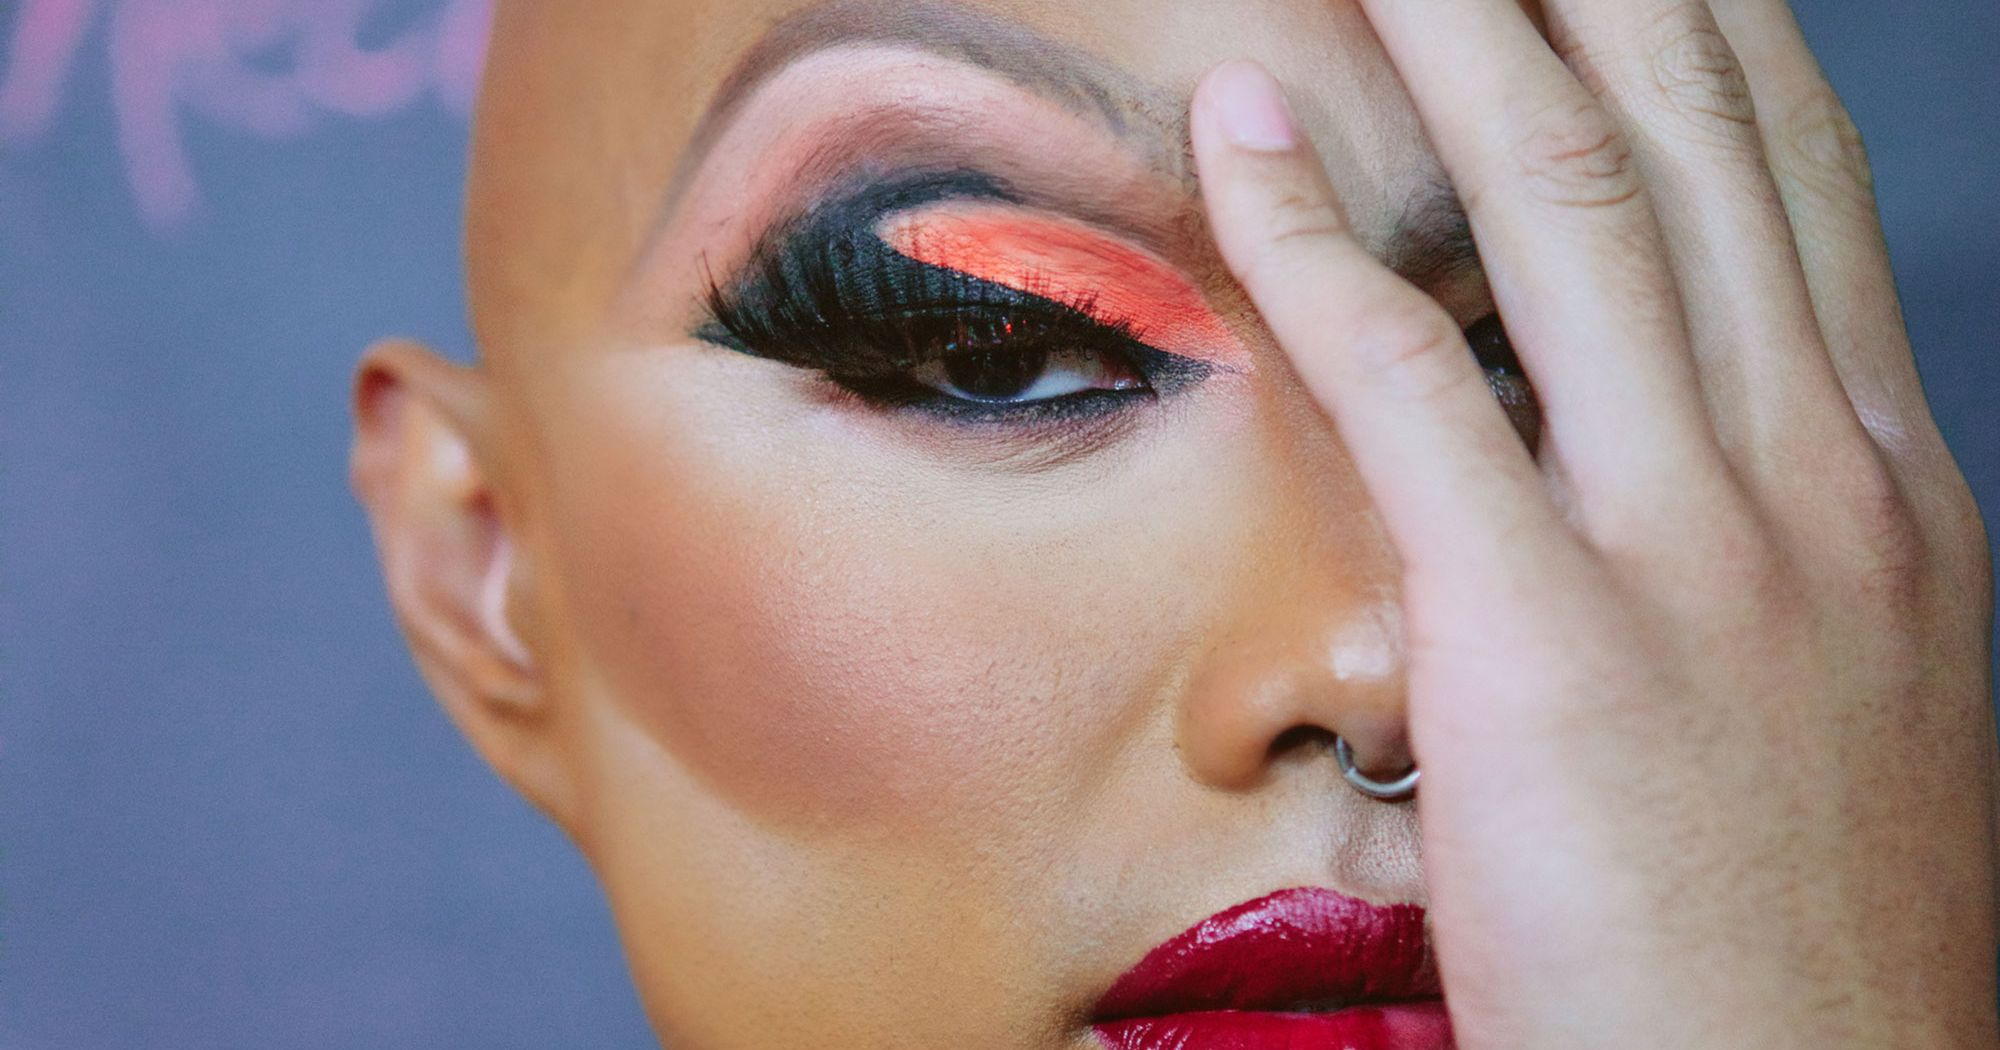 Drag Eye Makeup How To Do Drag Queen Makeup Tutorial Tips From Pros